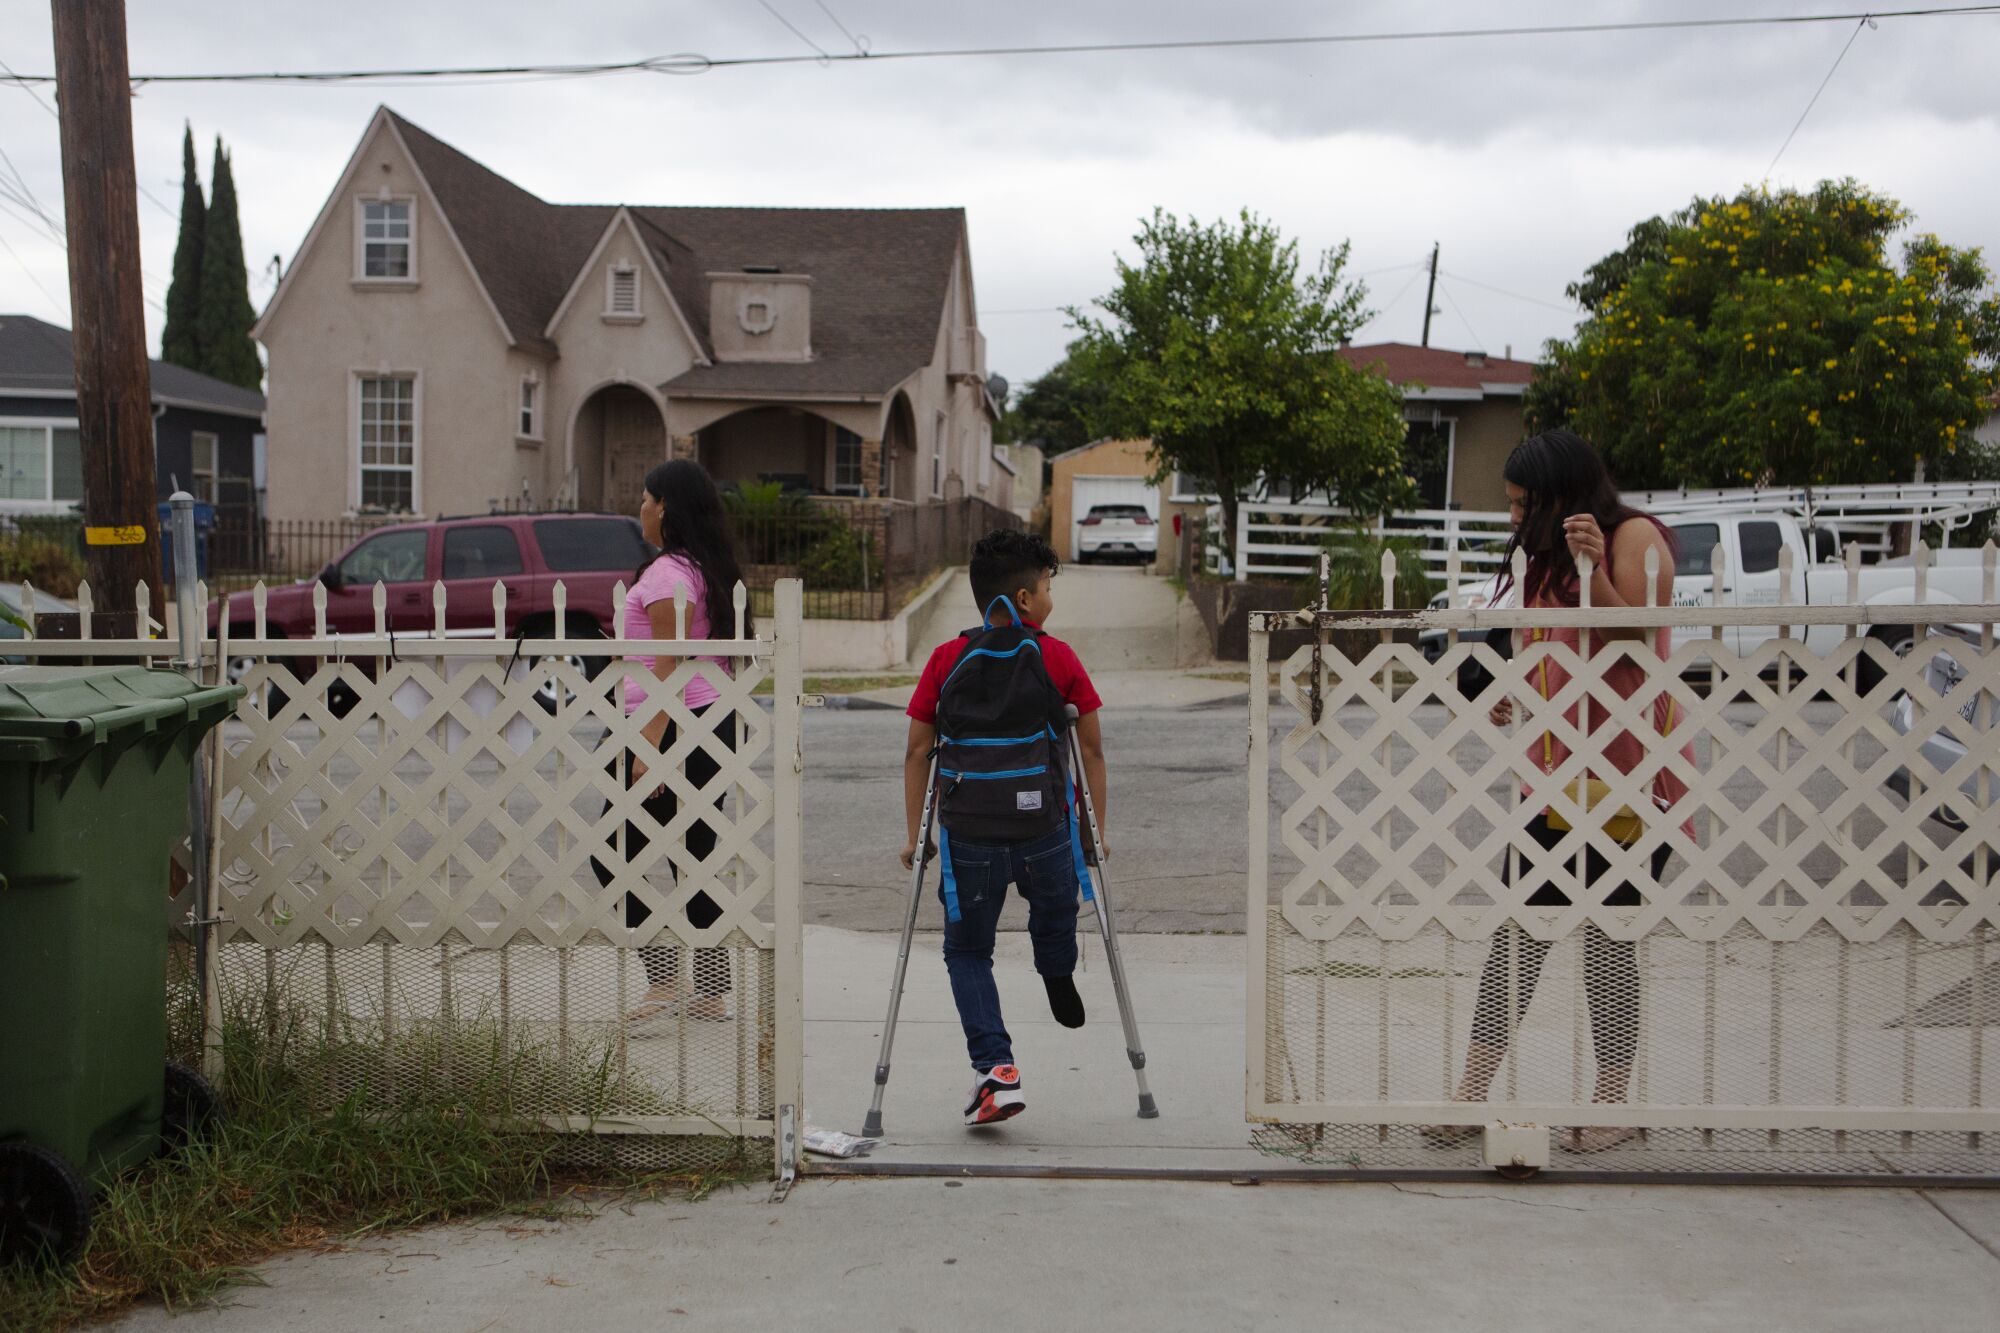 Efraín walks out of his house on crutches.